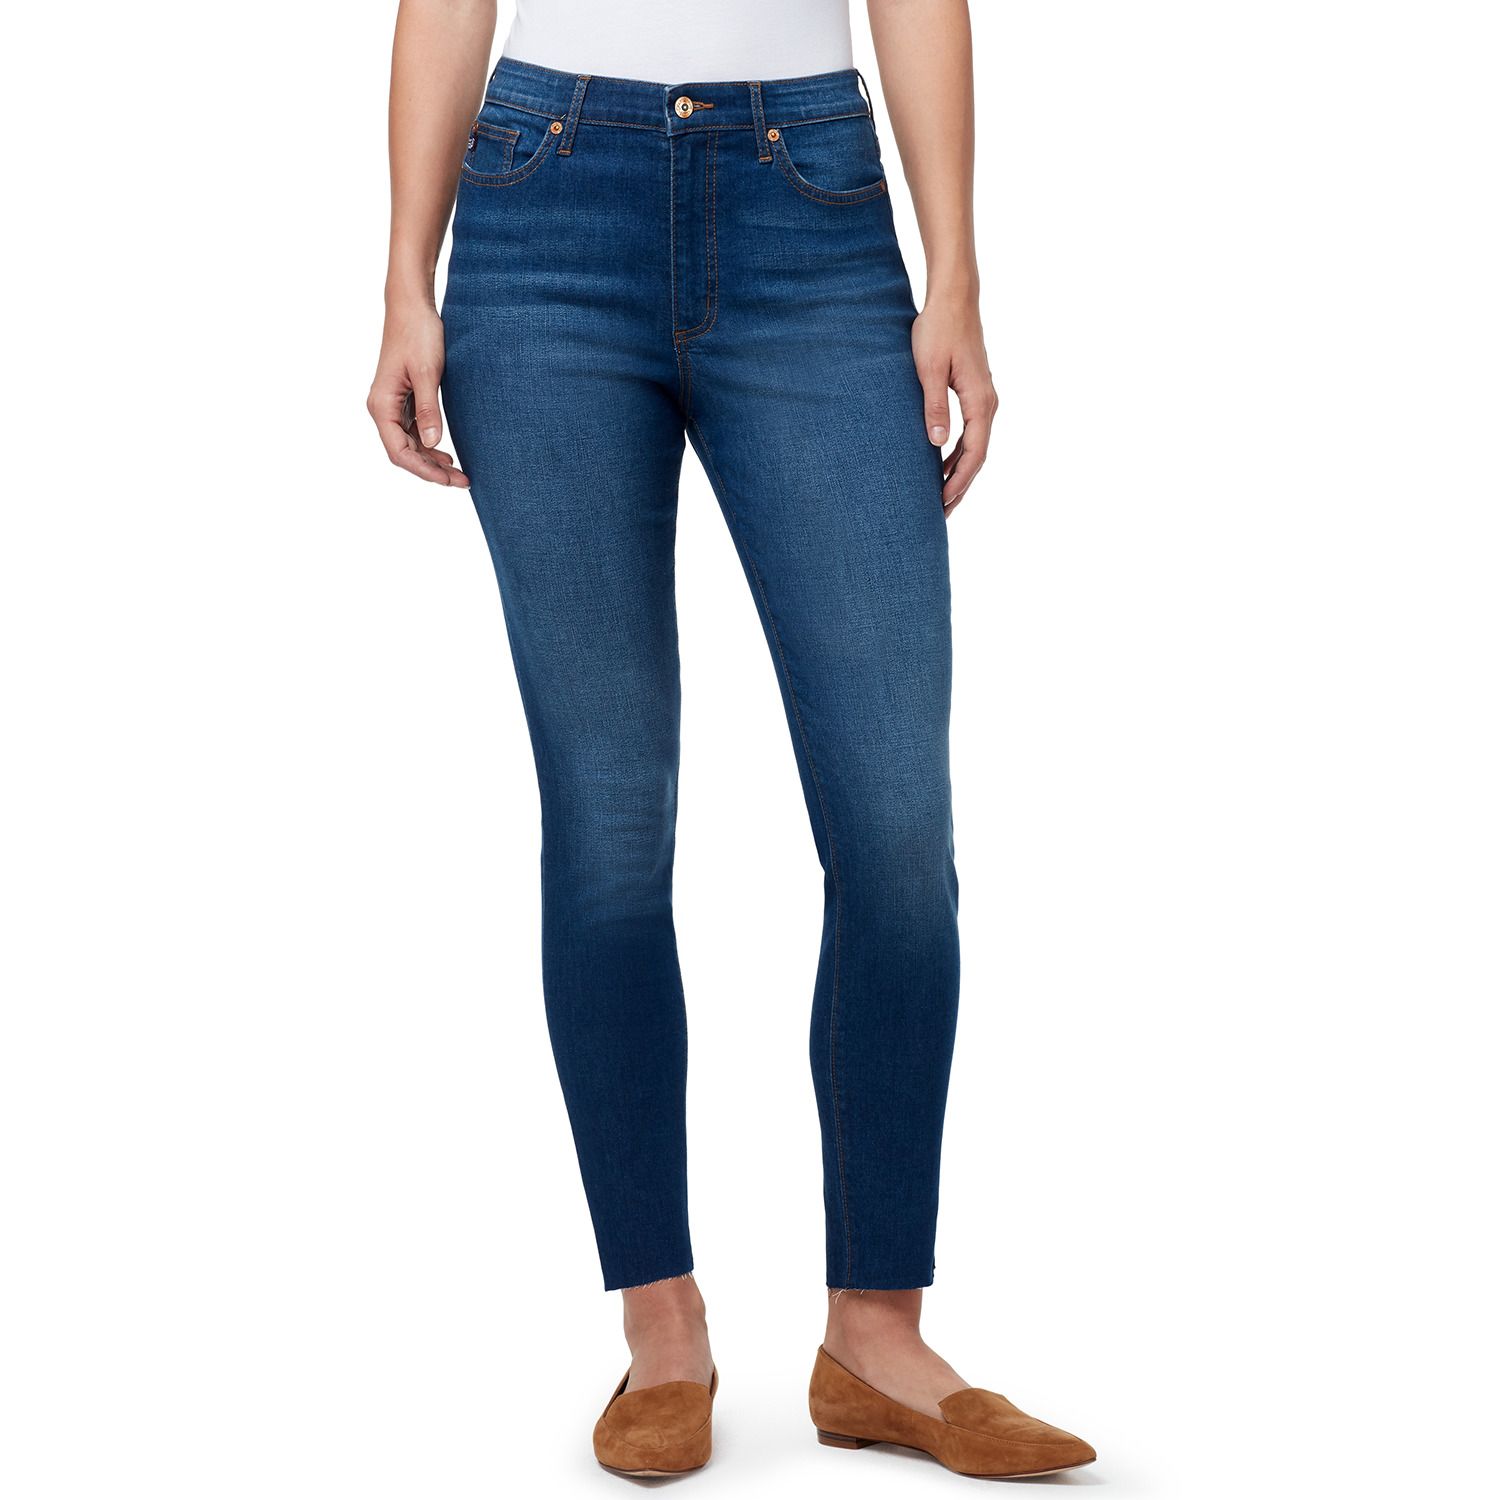 Women's Chaps Mid Rise Skinny Jeans